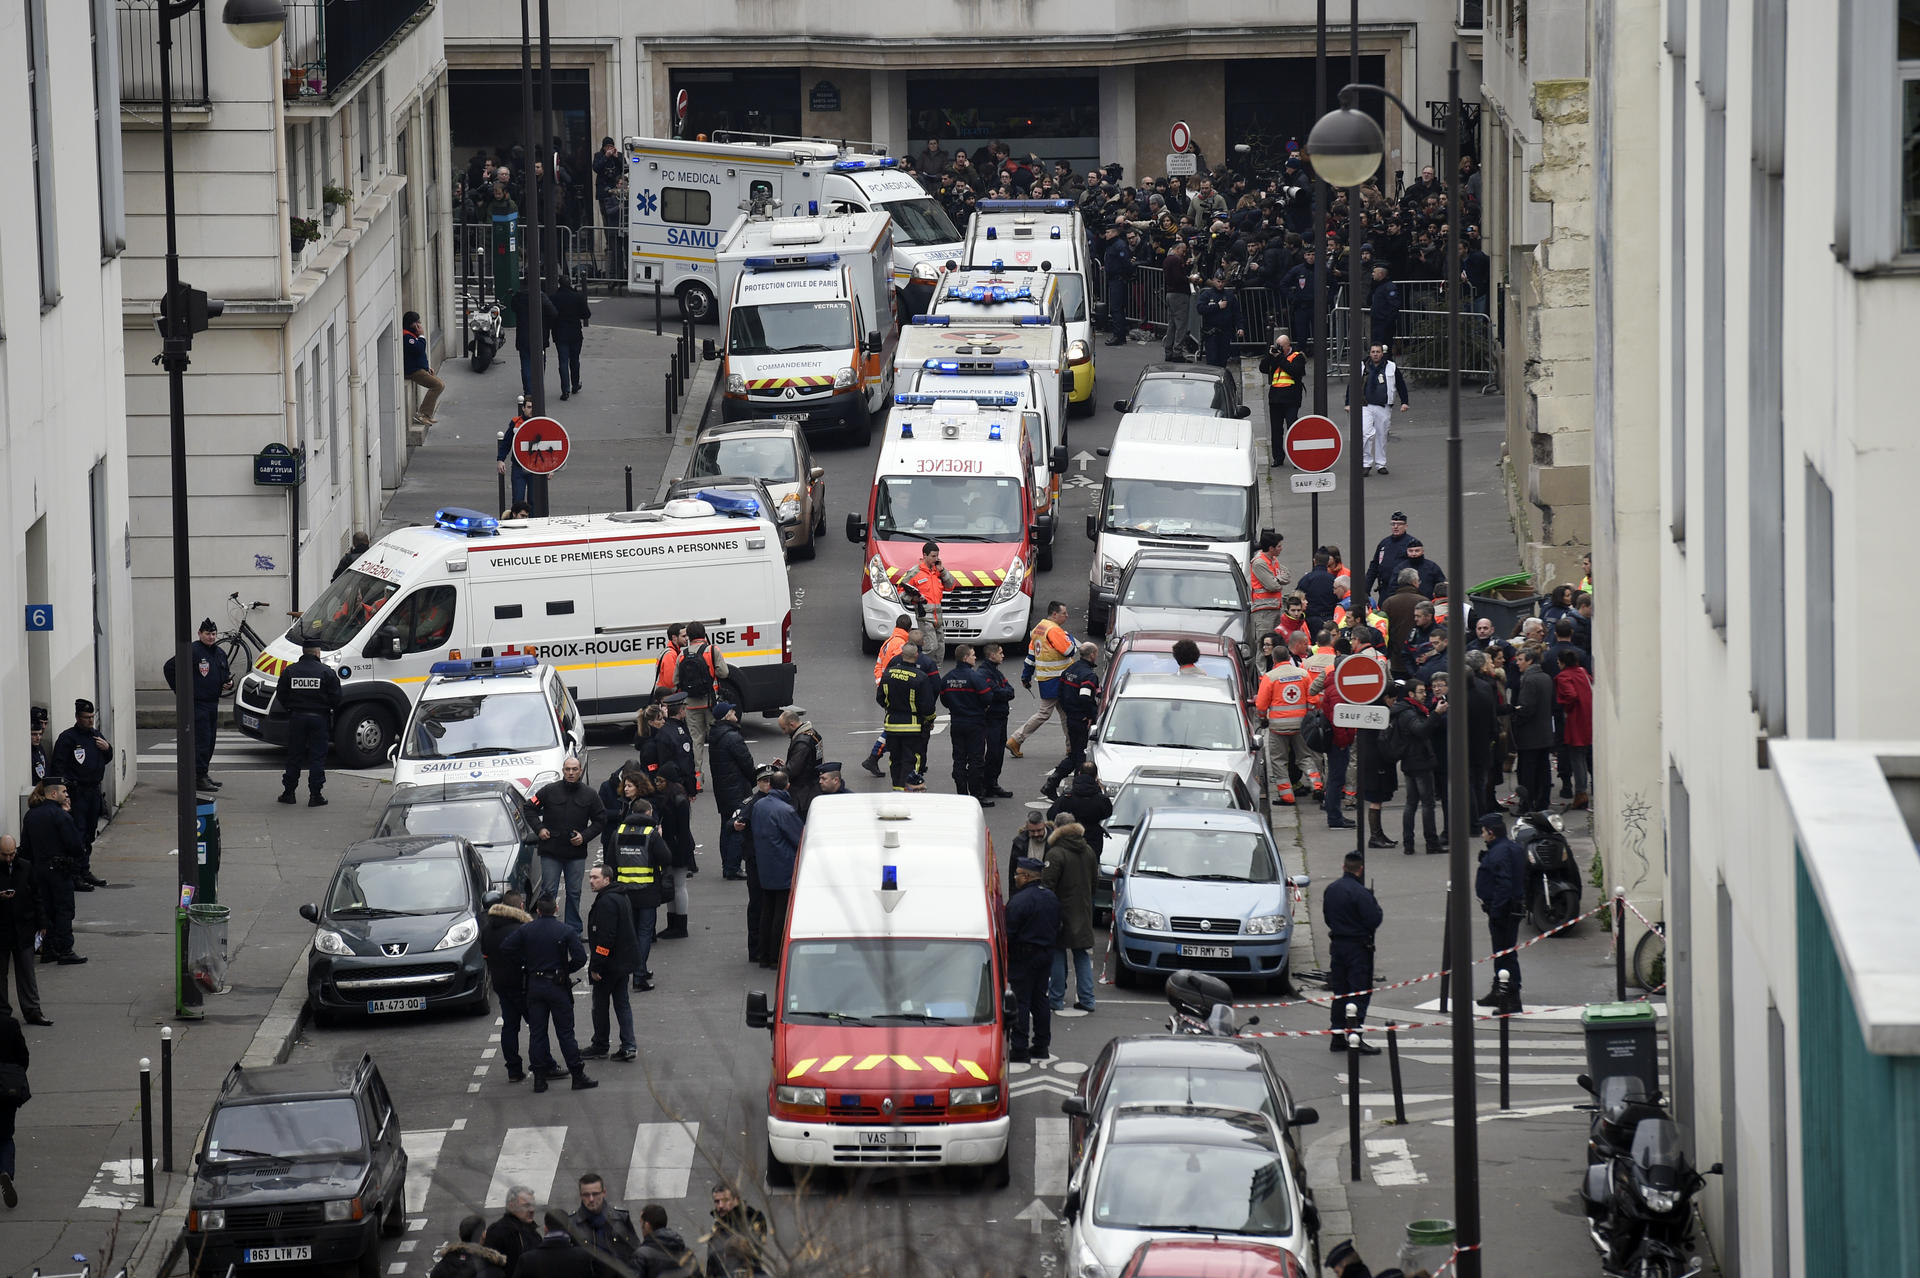 The scene outside Charlie Hebdo's offices in Paris immediately after the massacre. Photo: AFP